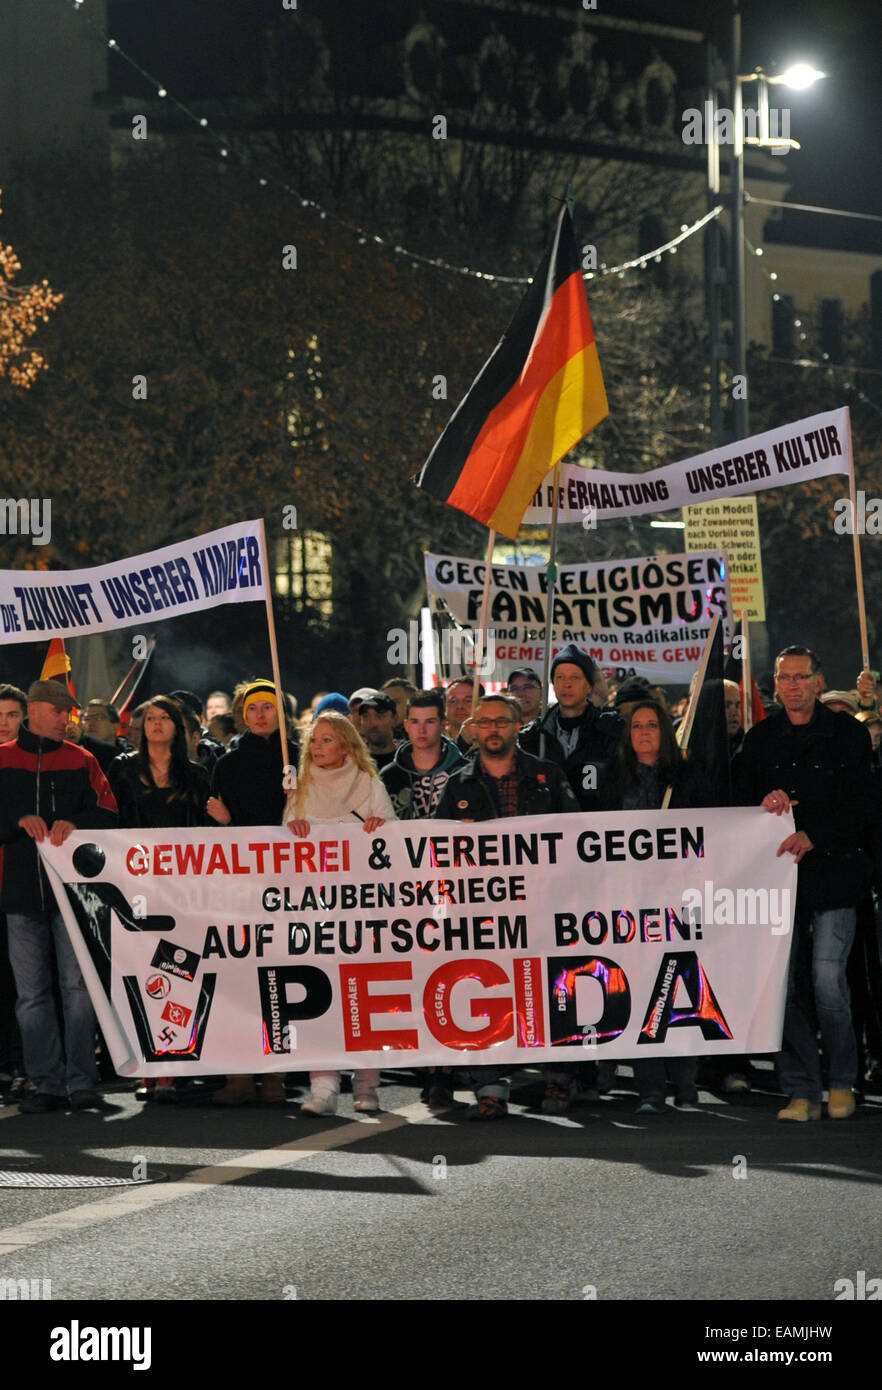 Dresden, Germany. 17th Nov, 2014. People march with a banner reading 'nonviolent and united against religious wars on German soil! Pegida' during a protest of right-wing initiative PEGIDA ('Patriotische Europaeer gegen die Islamisierung des Abendlandes', lit: 'Patriotic Europeans against Islamization of the Occident') in Dresden, Germany, 17 November 2014. PEGIDA claims to be against religious fanatism in any form, left-wing initiatives say the PEGIDA is promoting a hatred towards Islam and asylum seekers. Photo: MATTHIAS HIEKEL/dpa/Alamy Live News Stock Photo